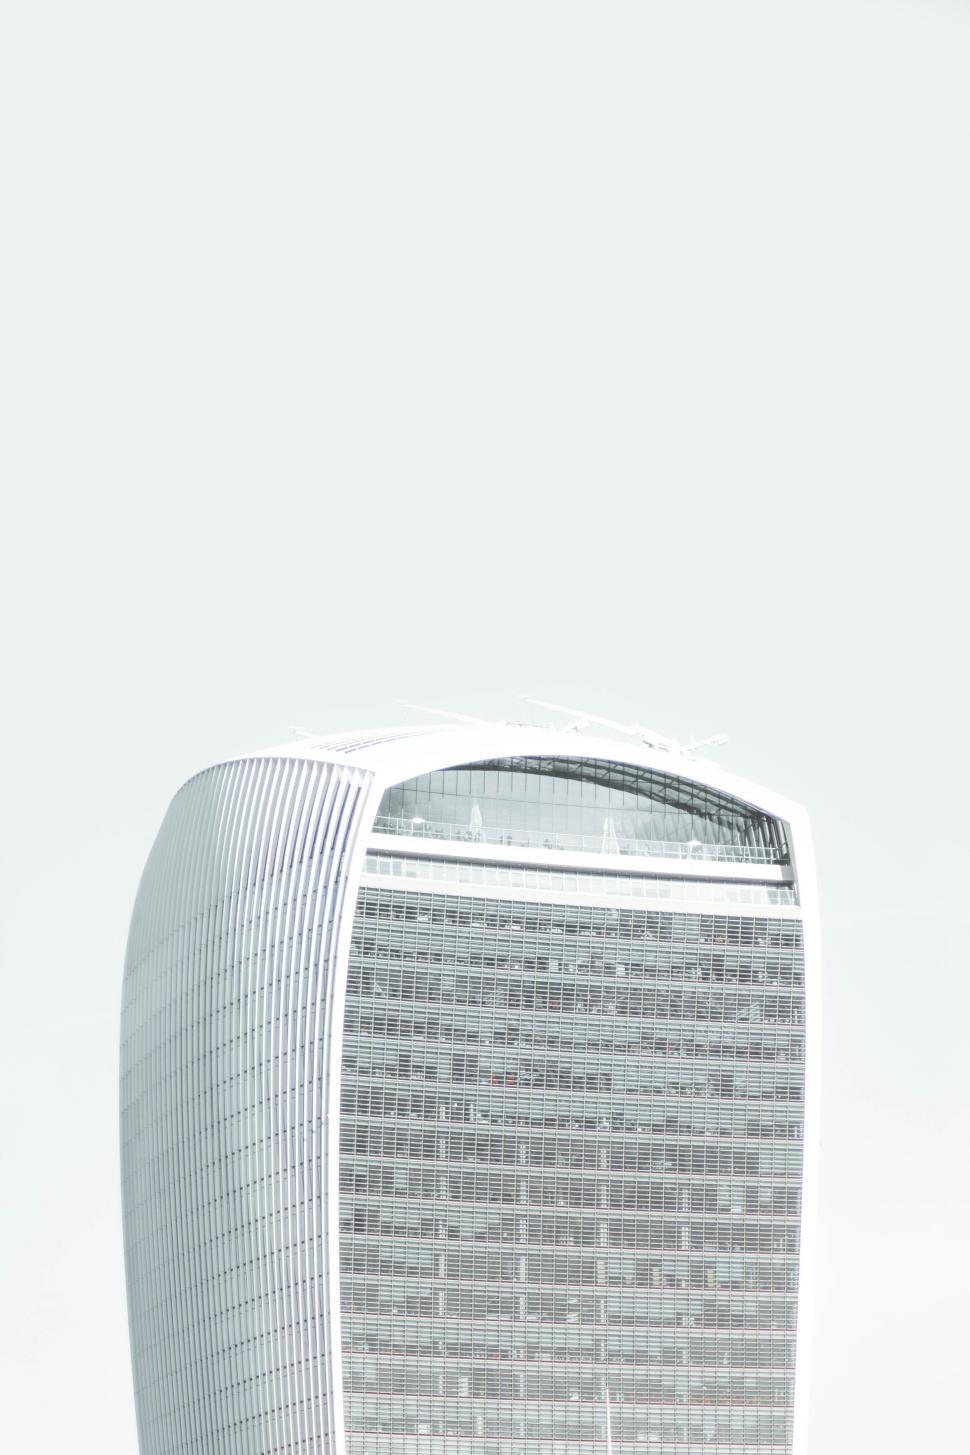 Free Image of A tall building with a glass roof 